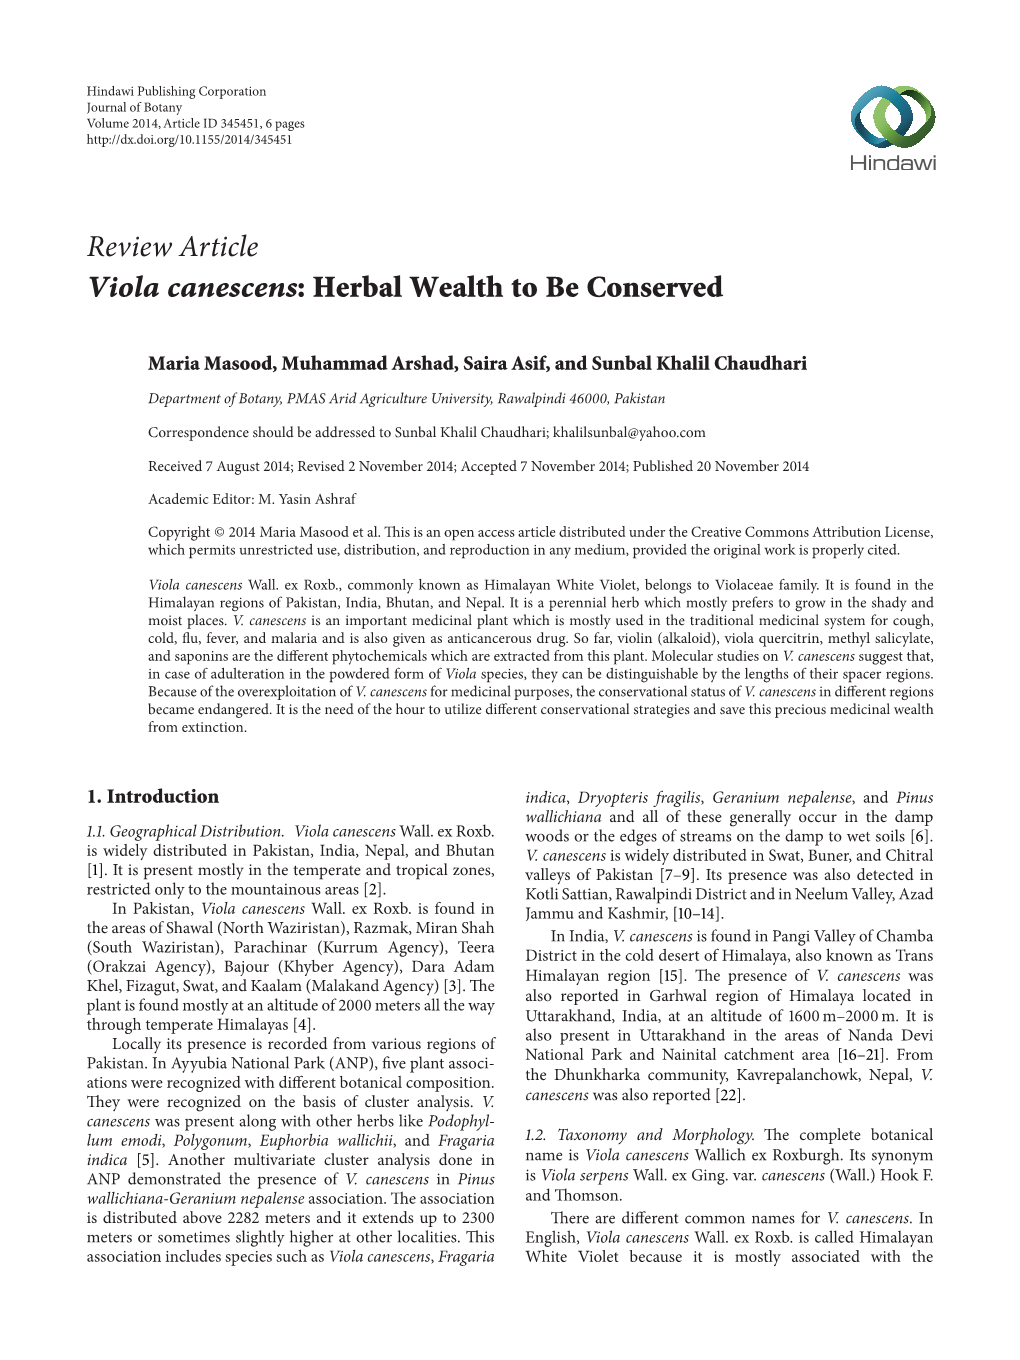 Review Article Viola Canescens: Herbal Wealth to Be Conserved